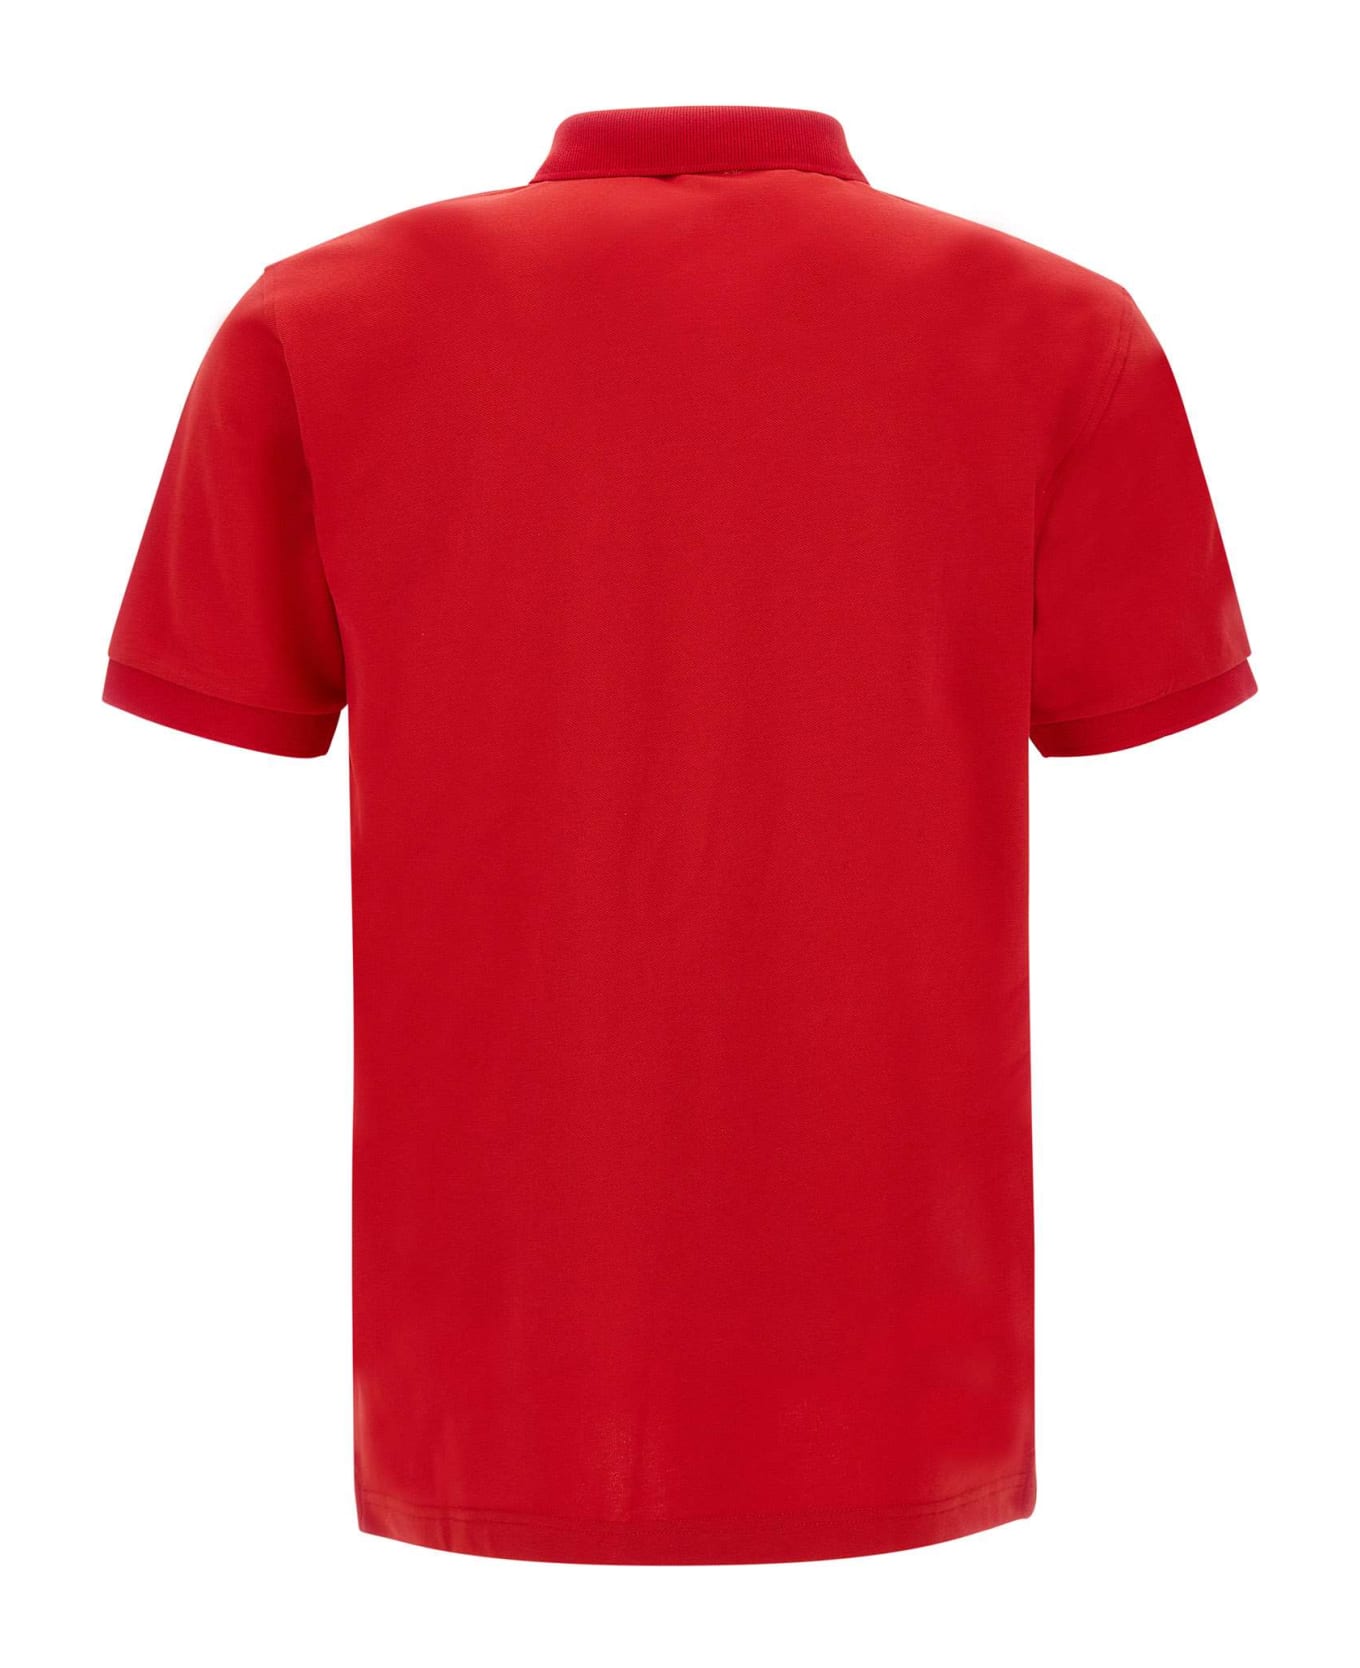 Sun 68 "solid" Pique Cotton Polo Shirt - RED ポロシャツ